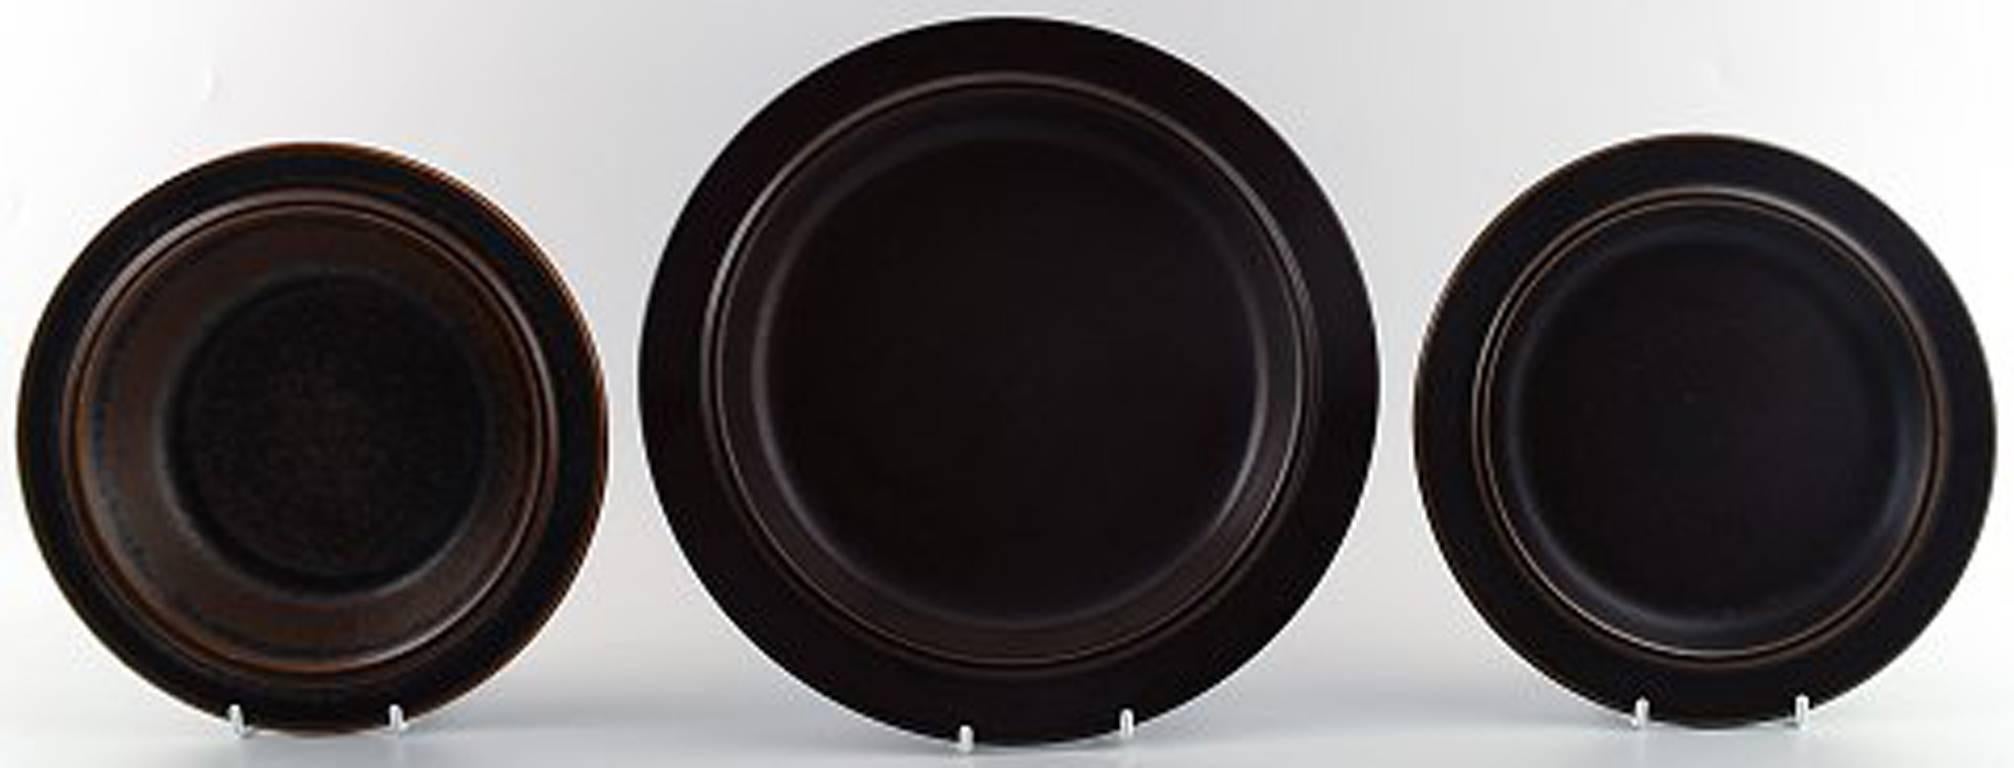 Large and complete 12 p. Arabia Ruska stoneware dinner service.

Finnish Design, 1960-1970s.

Comprising of 12 dinner plates (25 cm.) 12 lunch plates (20 cm.) 

12 pasta / soup dishes. Large round platter 35.5 cm
. 
Oblong dish 33.5 cm. Bowl